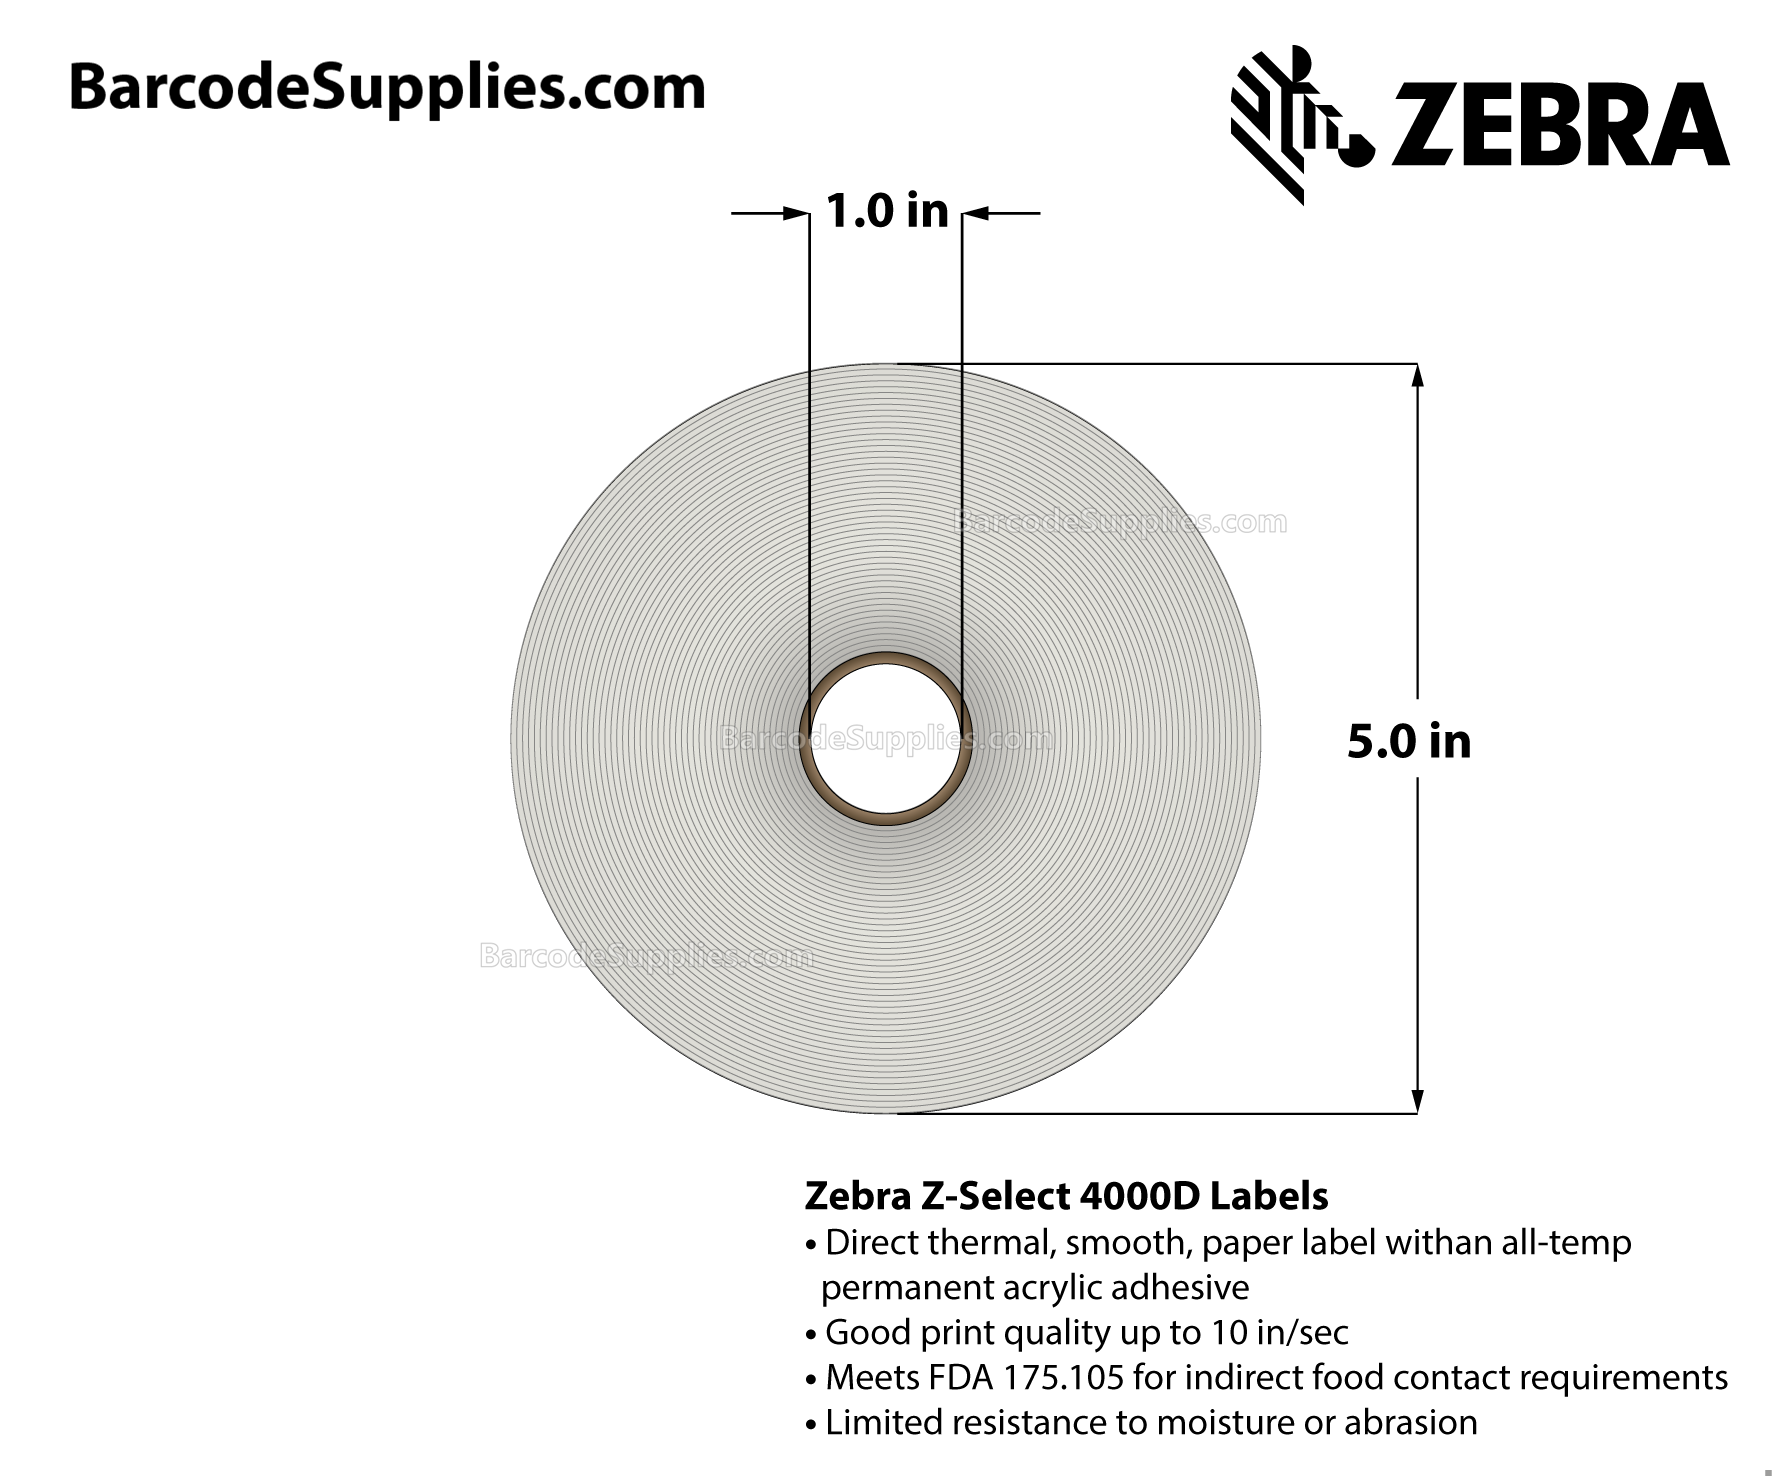 4 x 2.5 Direct Thermal White Z-Select 4000D Labels With All-Temp Adhesive - Perforated - 1000 Labels Per Roll - Carton Of 6 Rolls - 6000 Labels Total - MPN: 10010048